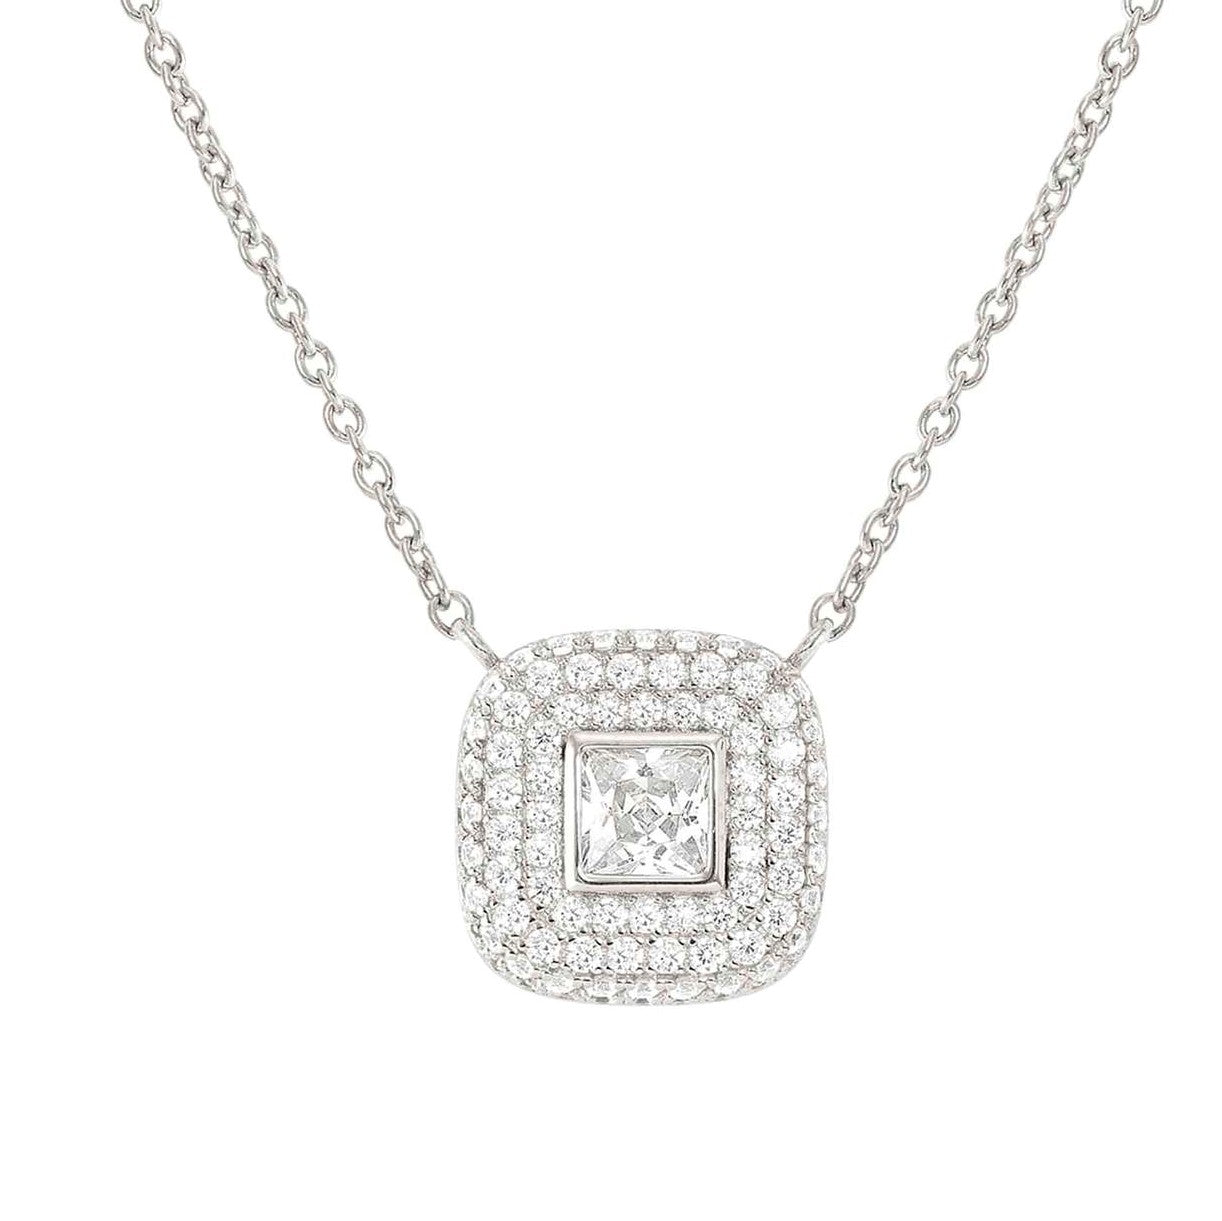 240406/036 DOMINA necklace in 925 sterling silver and cubic zirconia pavé